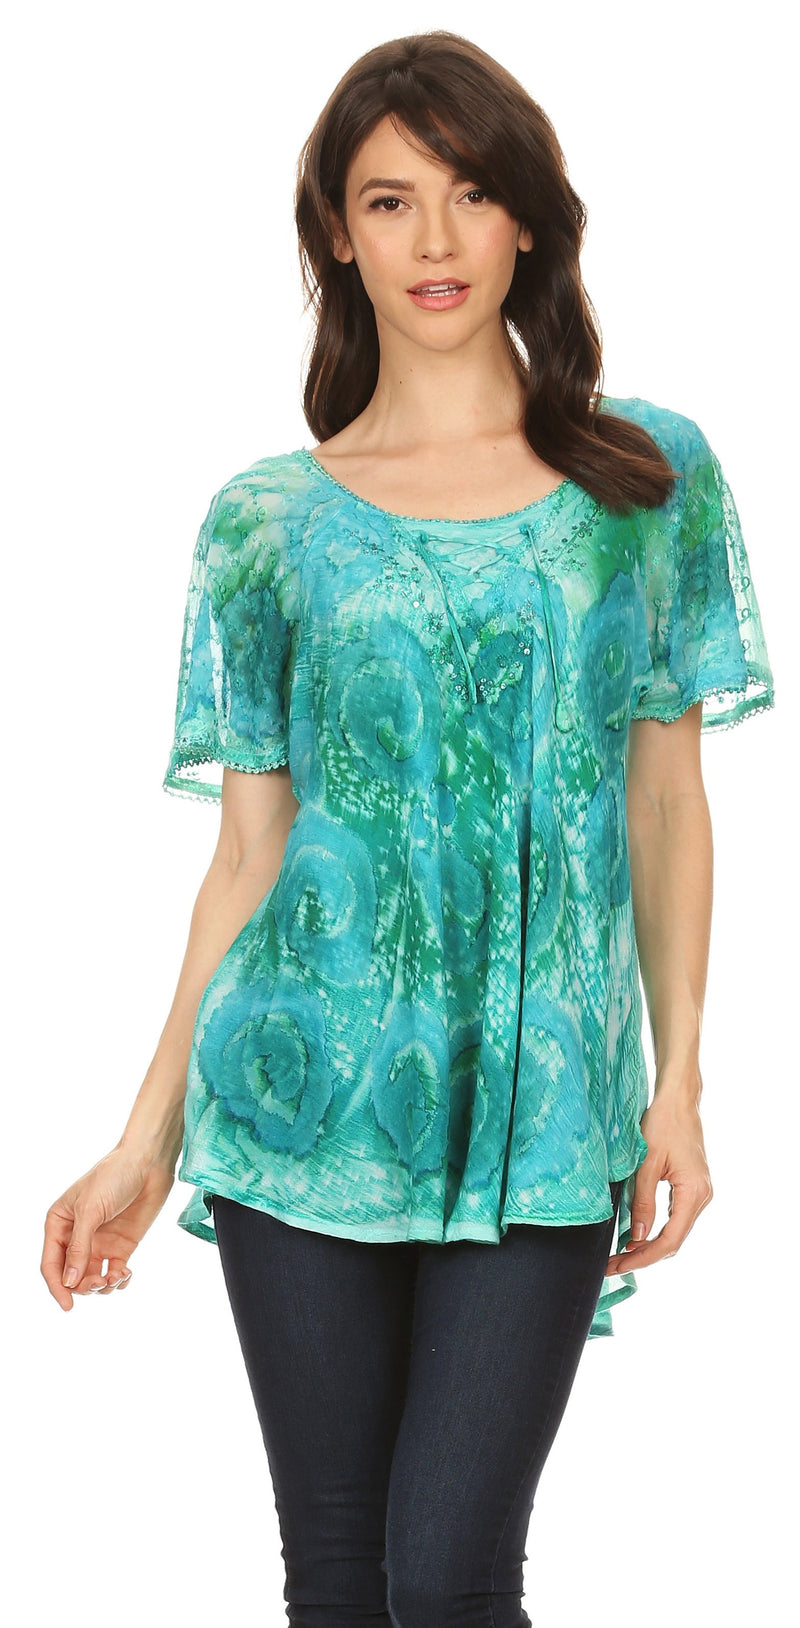 Sakkas Lena Tie-dye Short Sleeve Blouse Top with Crochet Lace and Embroidery